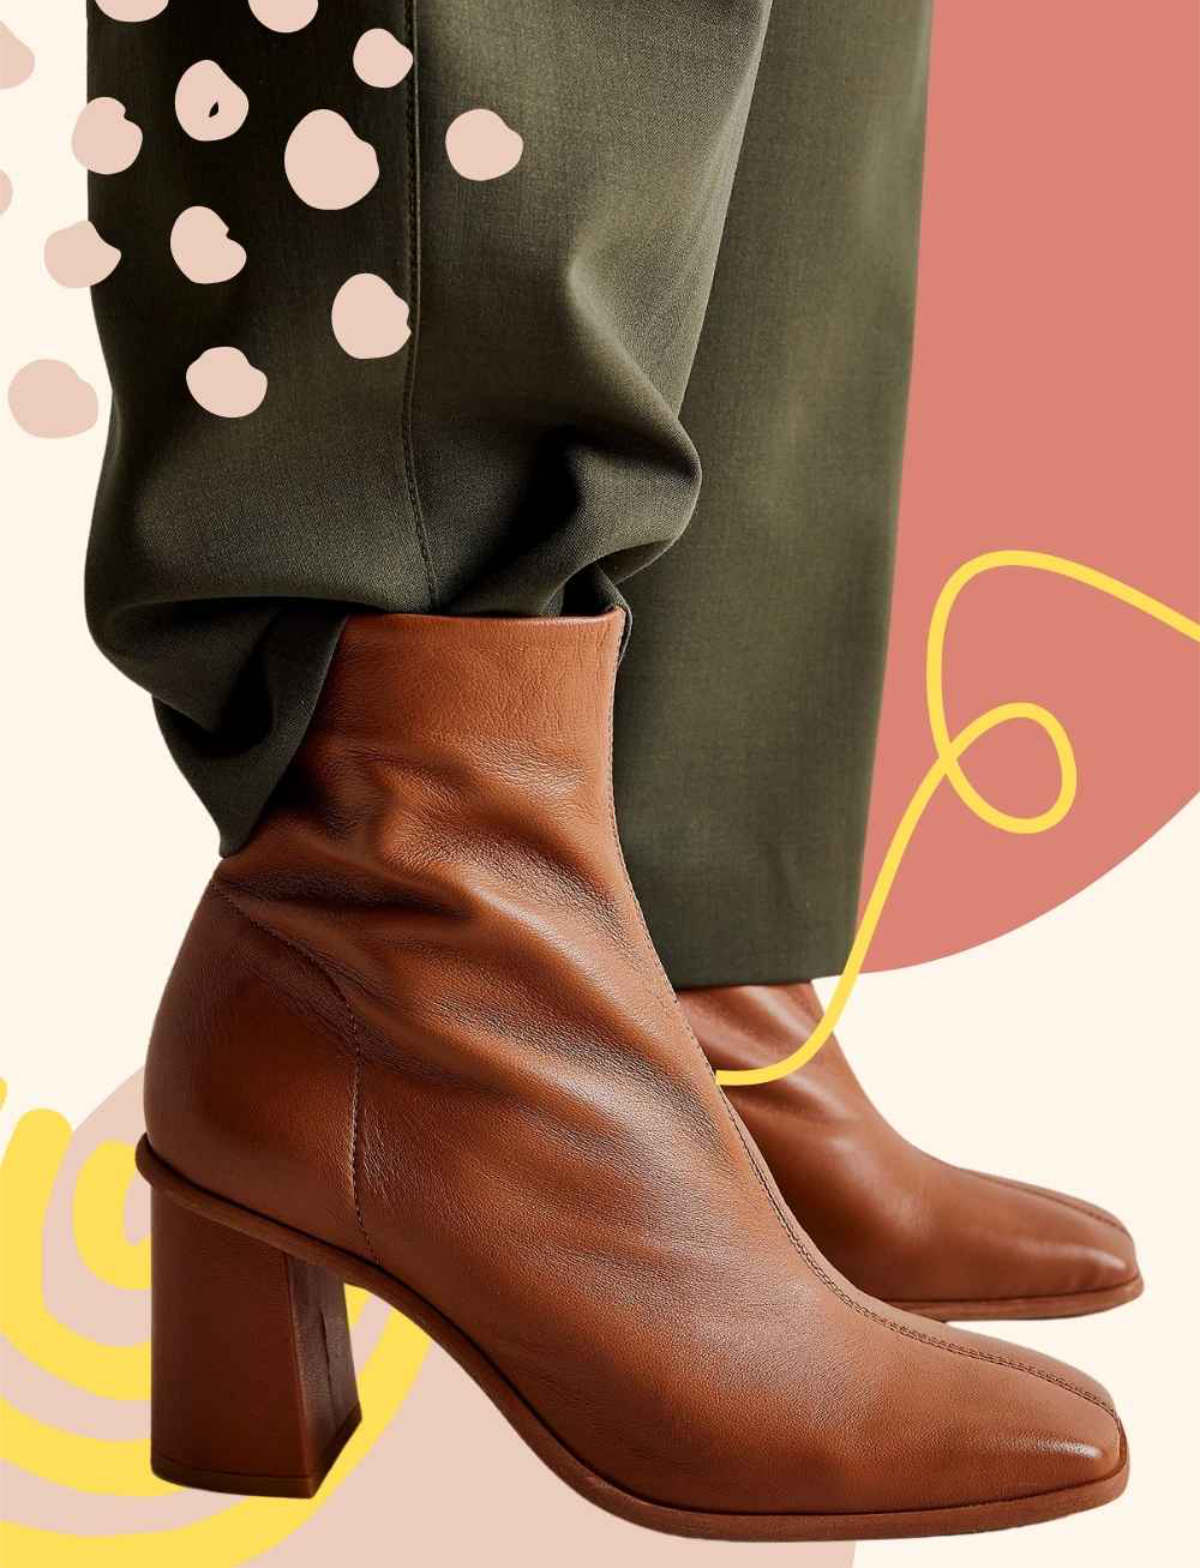 How to Wear Ankle Boots with Jeans  15 Outfit Ideas